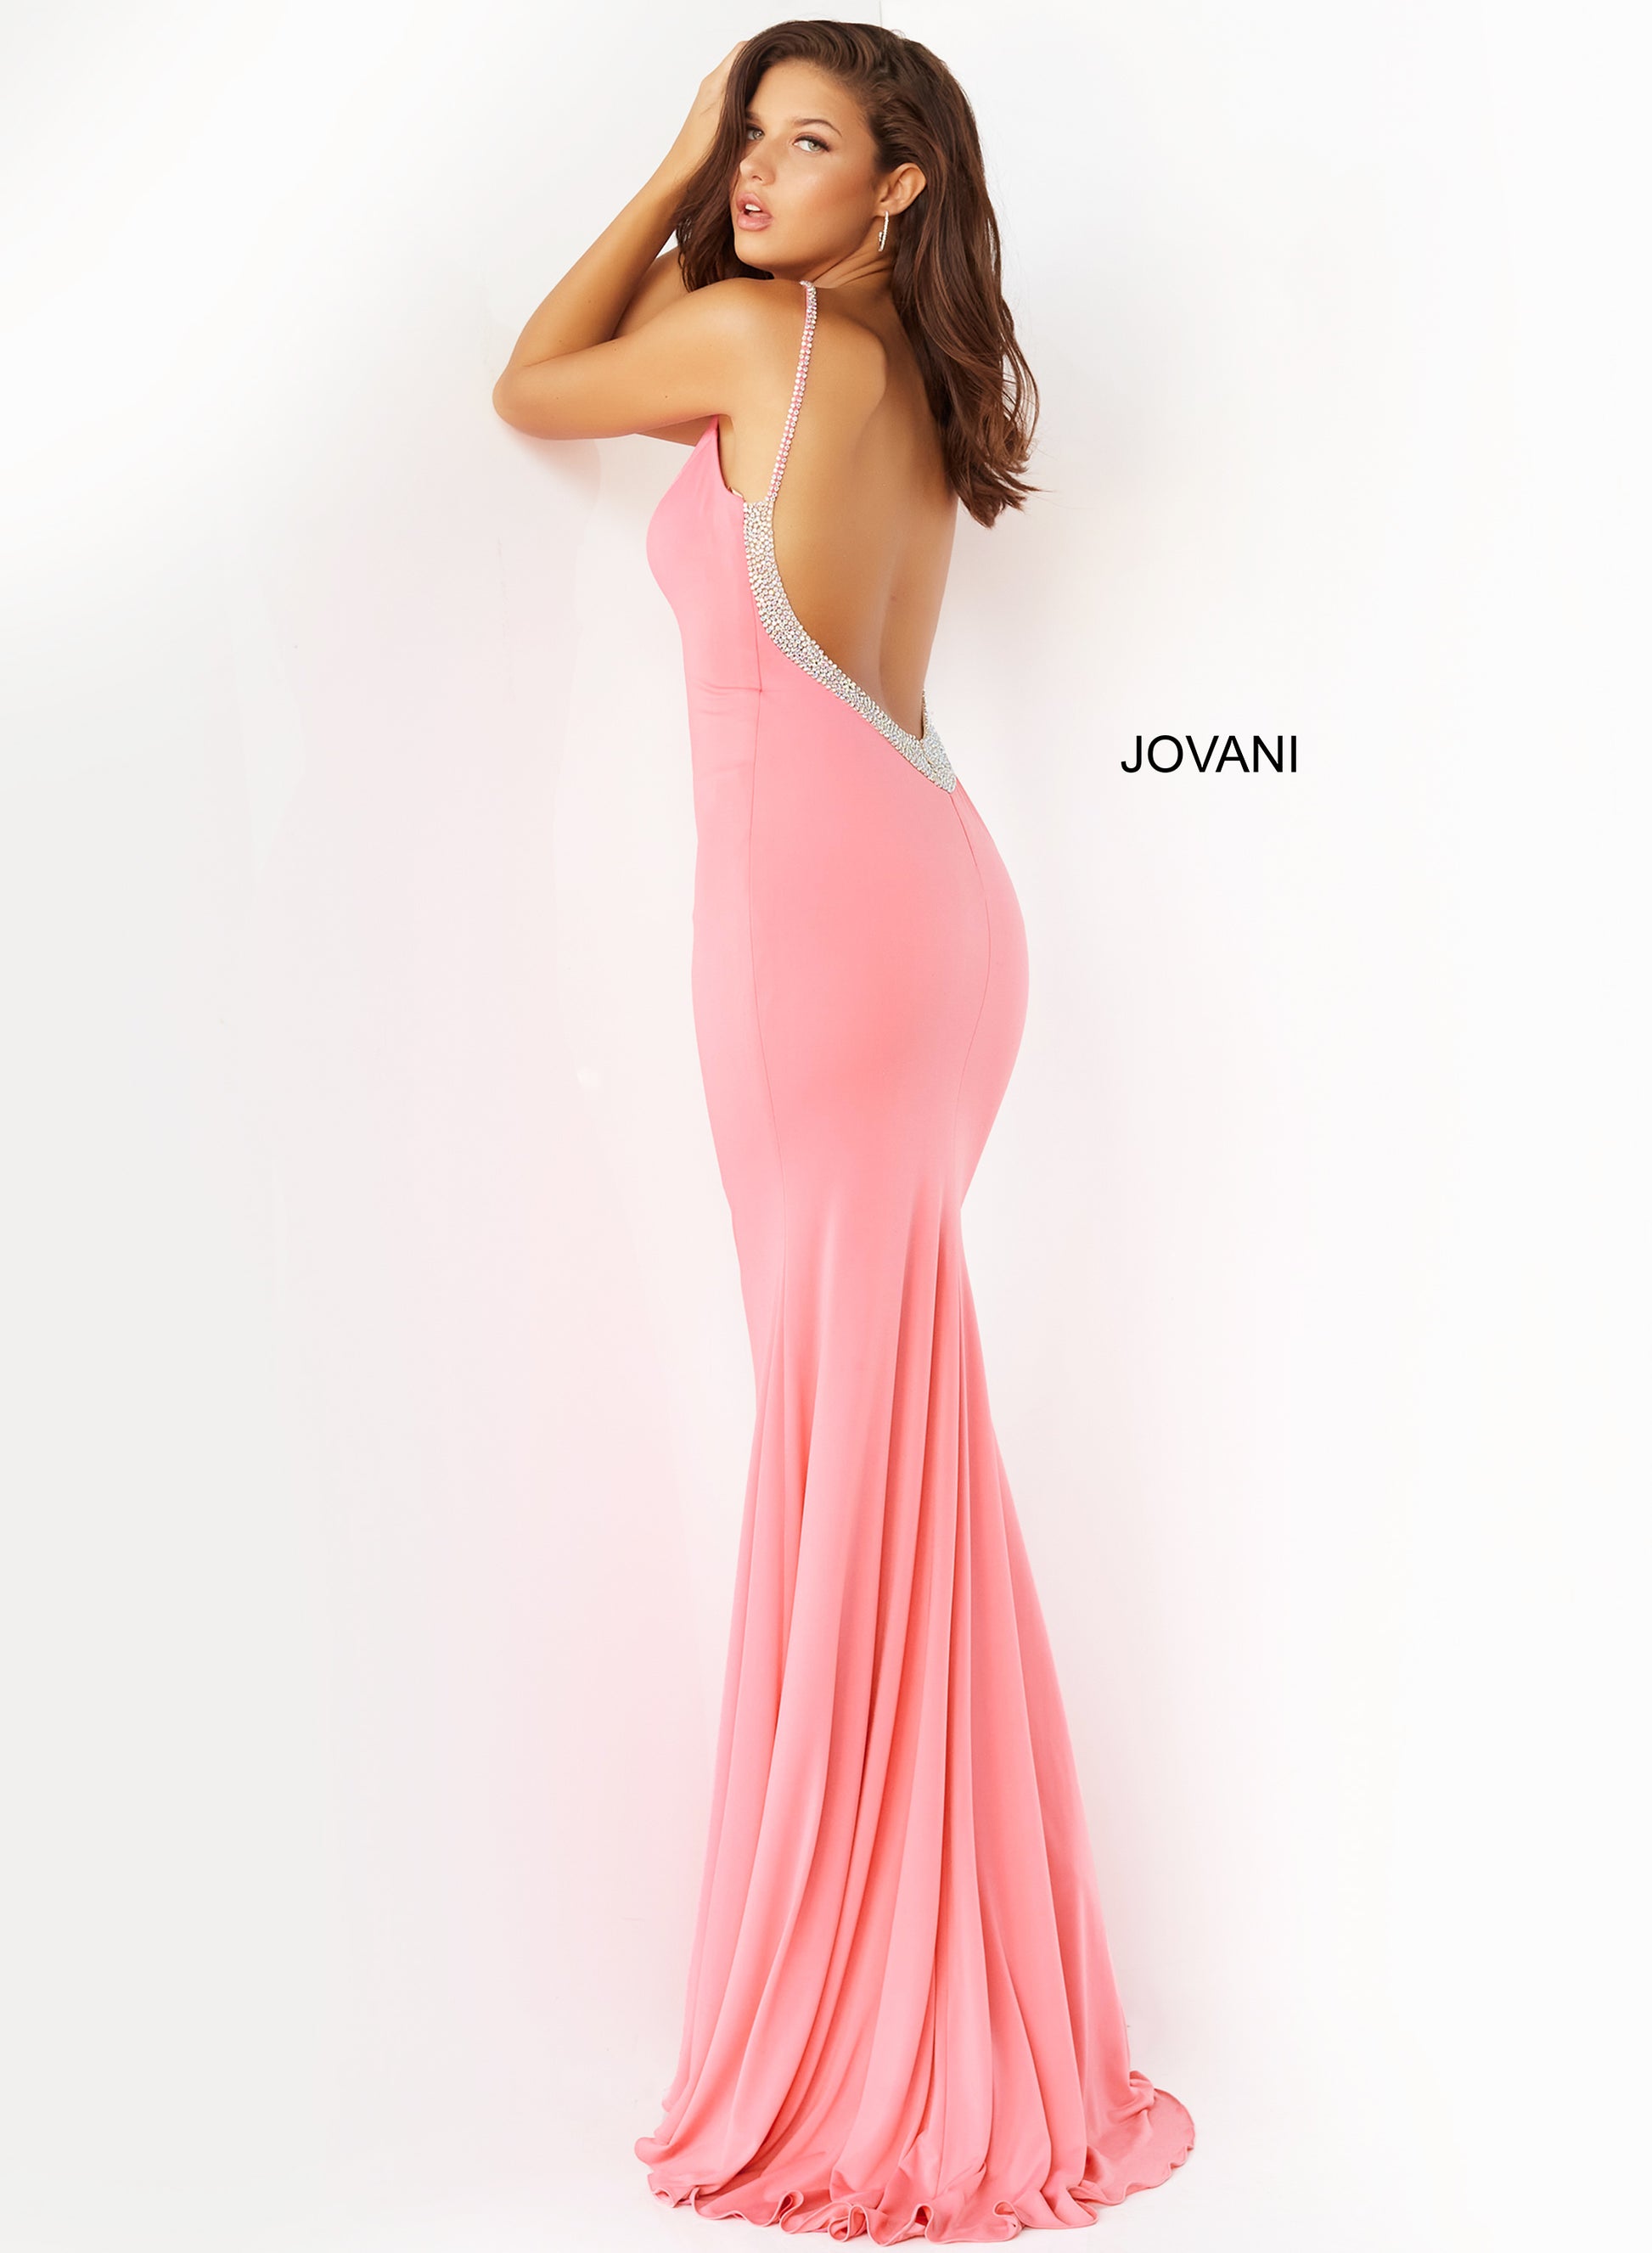 The Jovani 07297 Hot Pink Backless V-Neck Prom Dress is the epitome of elegance and glamour. This form-fitting prom dress is designed to hug your curves in all the right places and features a hot pink hue and a mesmerizing V neckline. The embellished spaghetti straps add a touch of shimmer and sparkle, while the low back, adorned with stones, gives a hint of sexiness to this stunning gown.